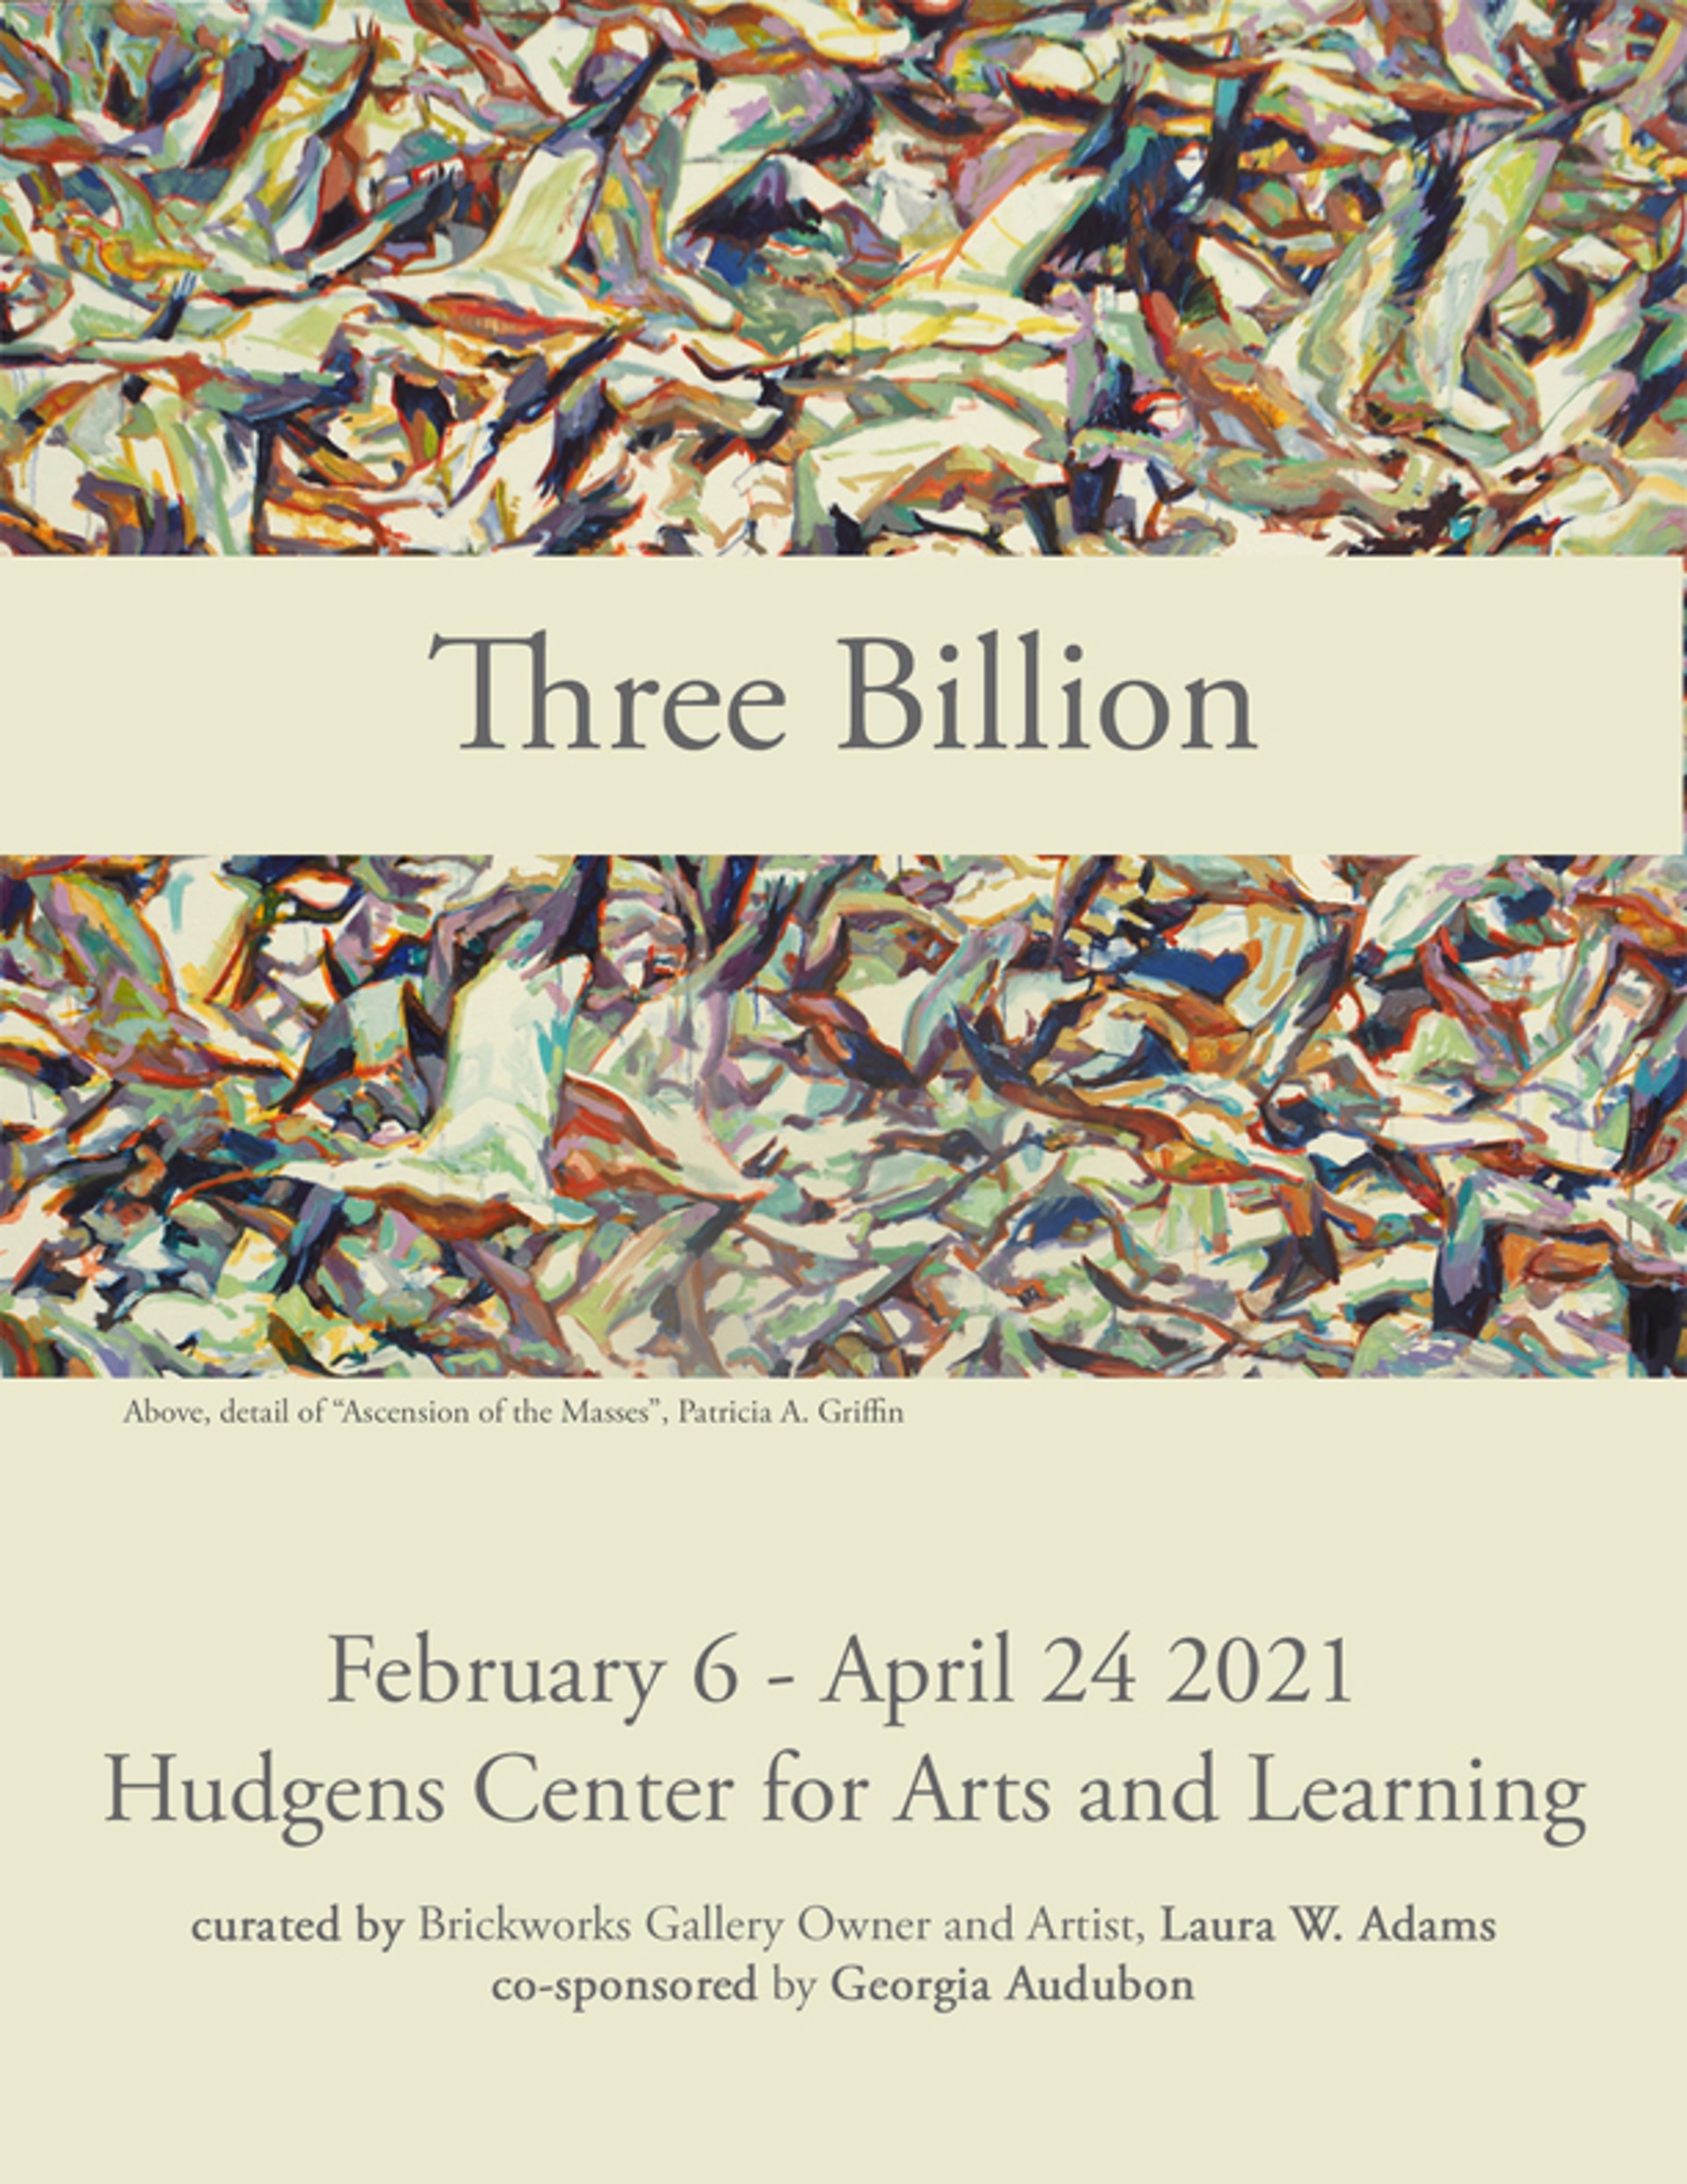 Show Statement by Hudgens Center for the Arts - Three Billion Show